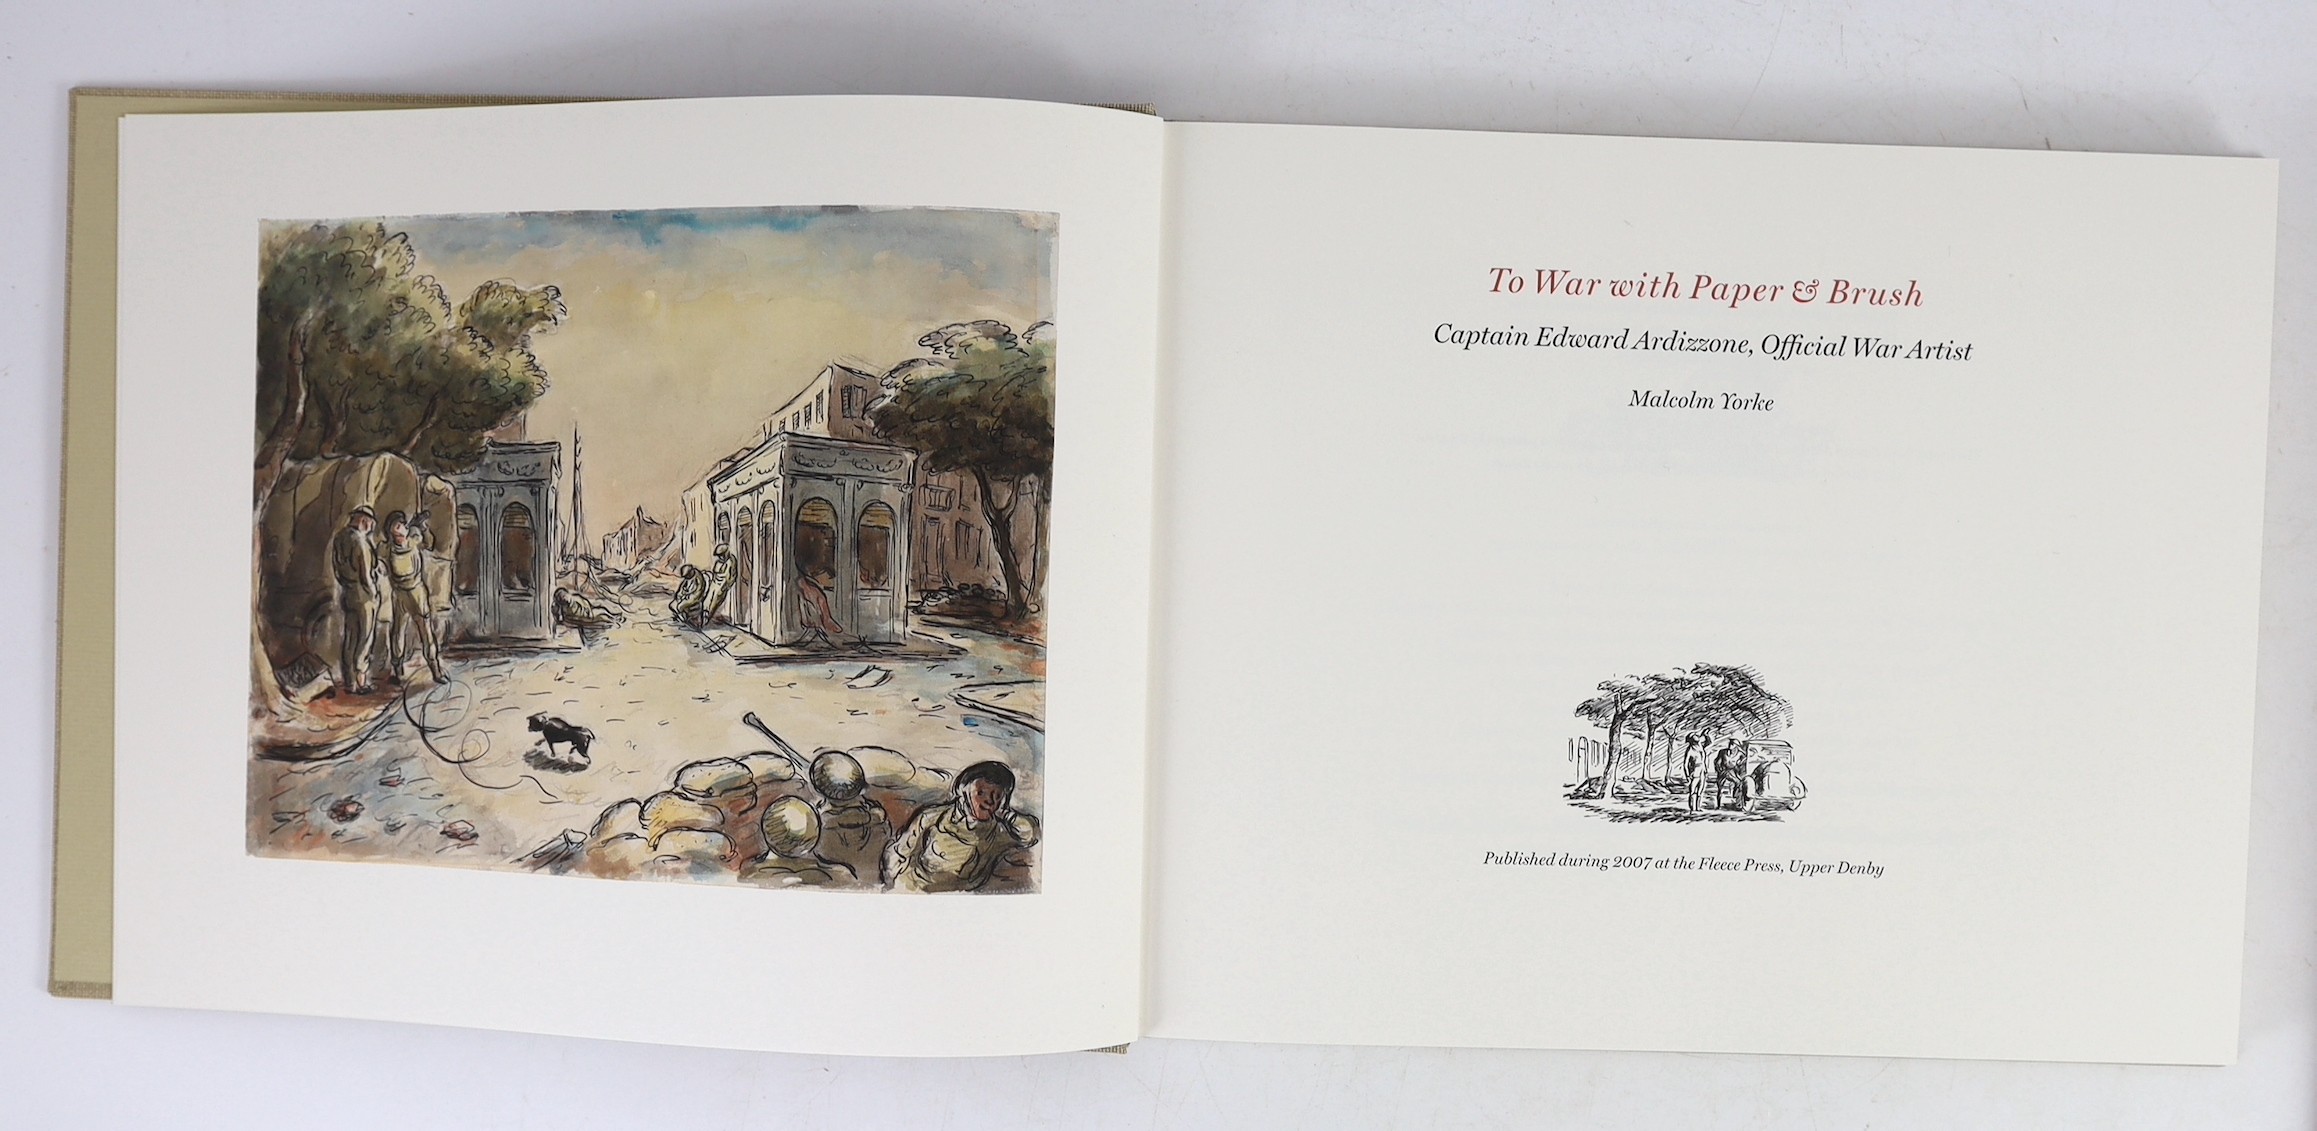 Yorke, Michael - To War with Paper and Brush: Captain Edward Ardizzone, Official War Artist, one of 700, oblong 4to, original cloth, Fleece Press, Upper Denby, 2007, in slip case; Cook, Olive - Tryphema Pruss, illustrate